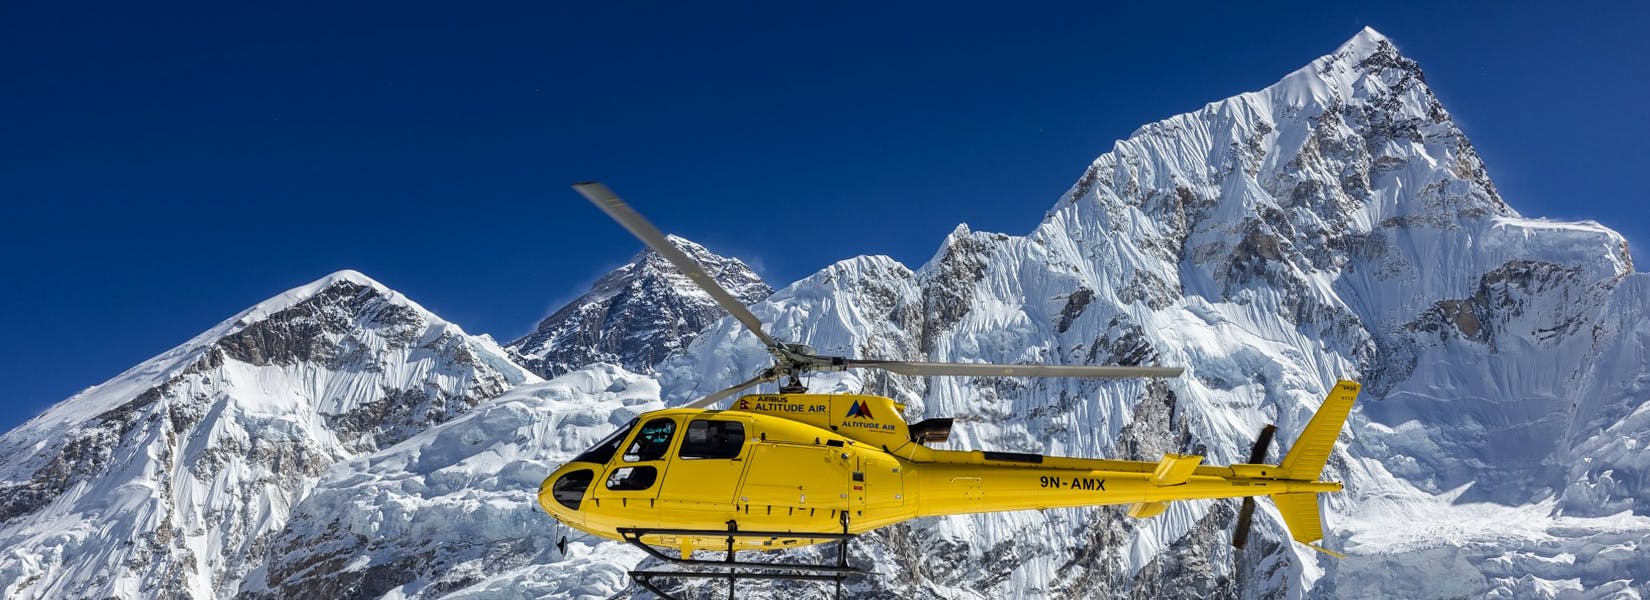 Best Helicopter Tour Packages in Nepal for your next Holiday